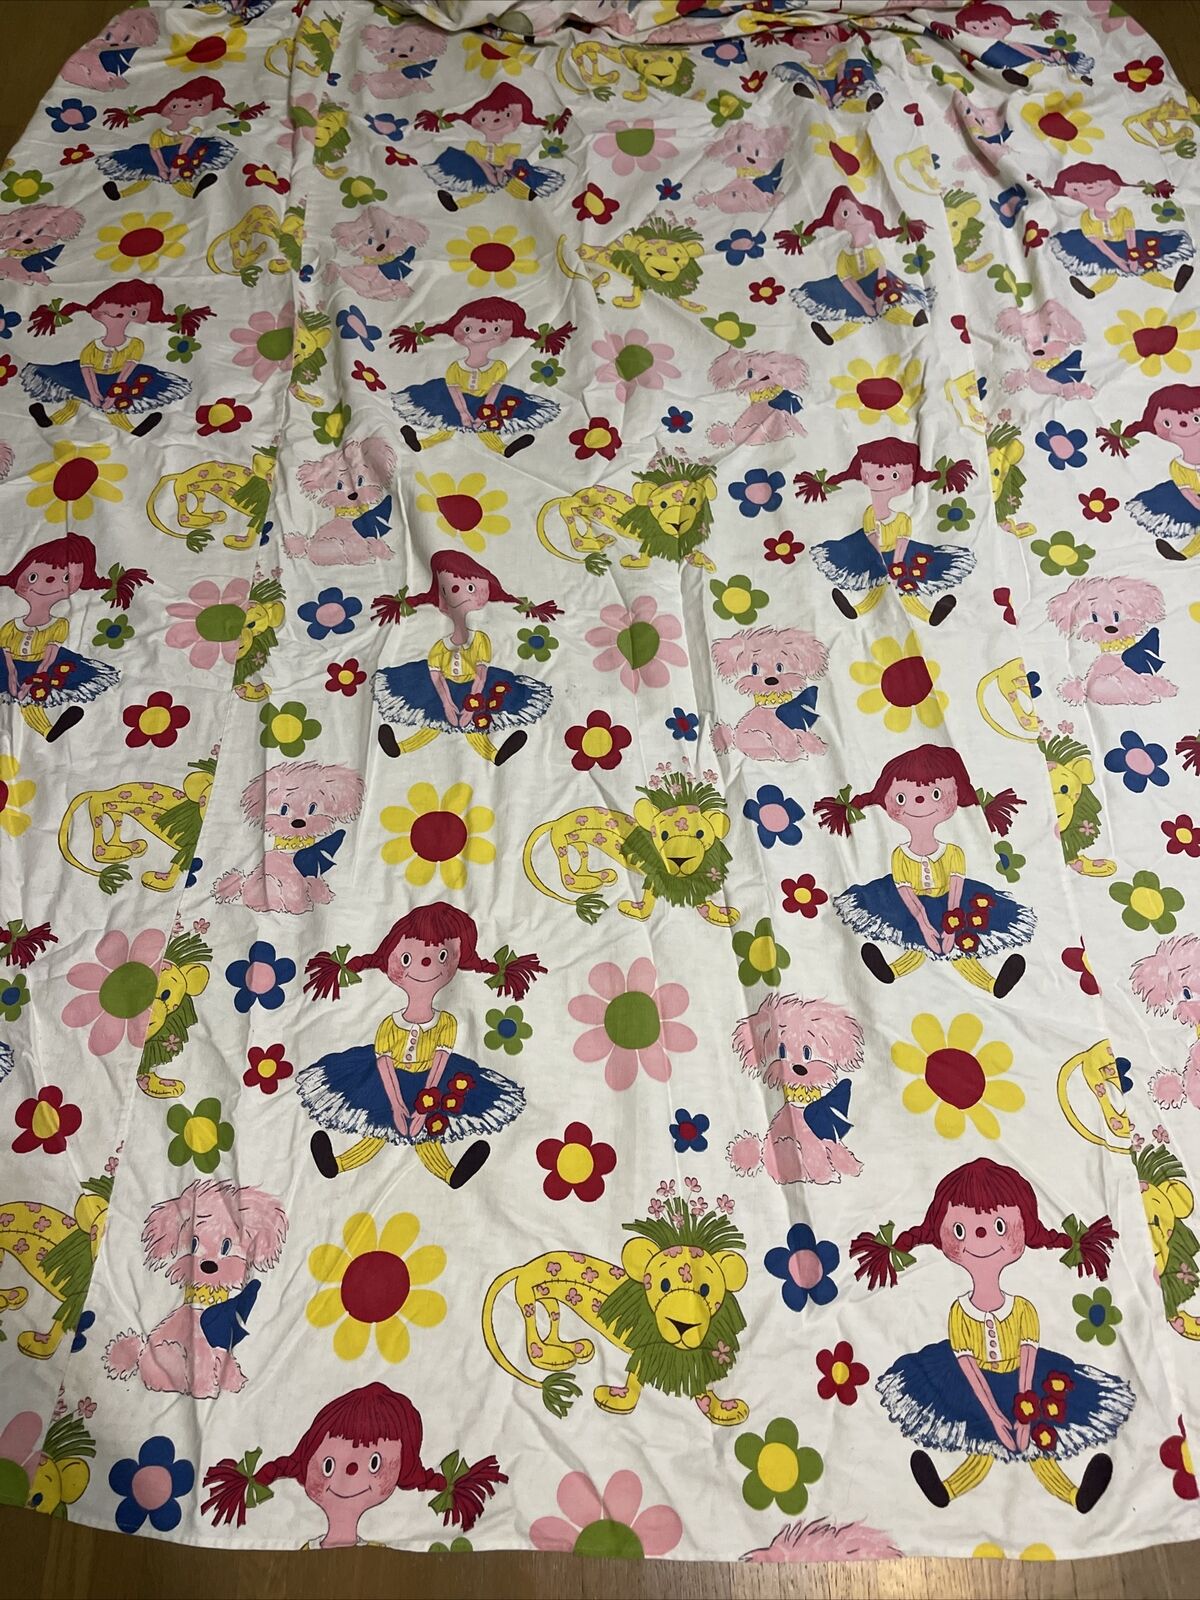 Vintage Sears Poodle Bed Spread Sheet 1960s. 74x100”